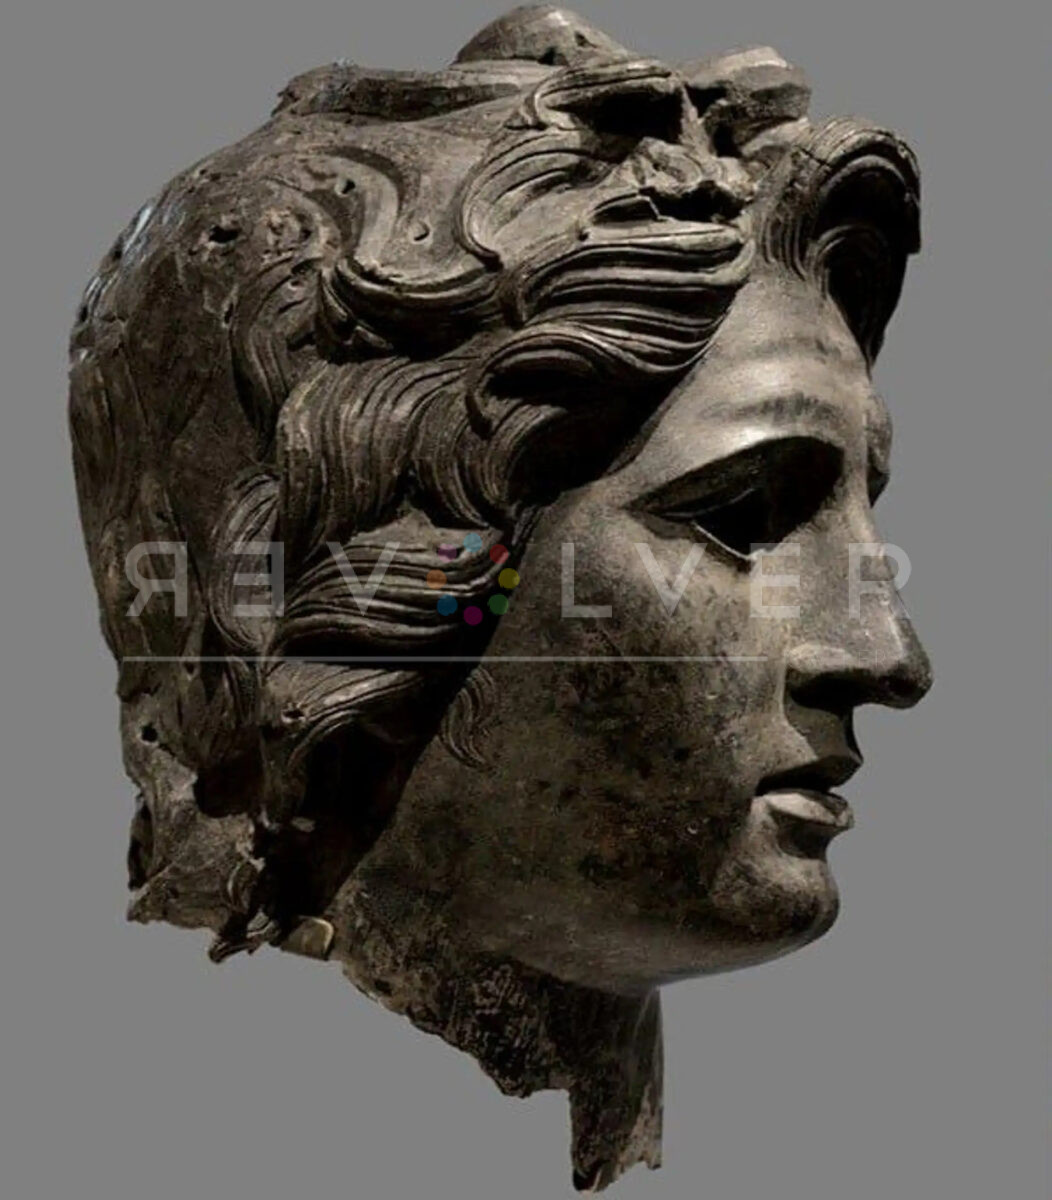 Head of Alexander the Great Bronze. Greek or Roman. Late Hellenistic to Hadrianic, ca. 150 BCE — 138 CE.